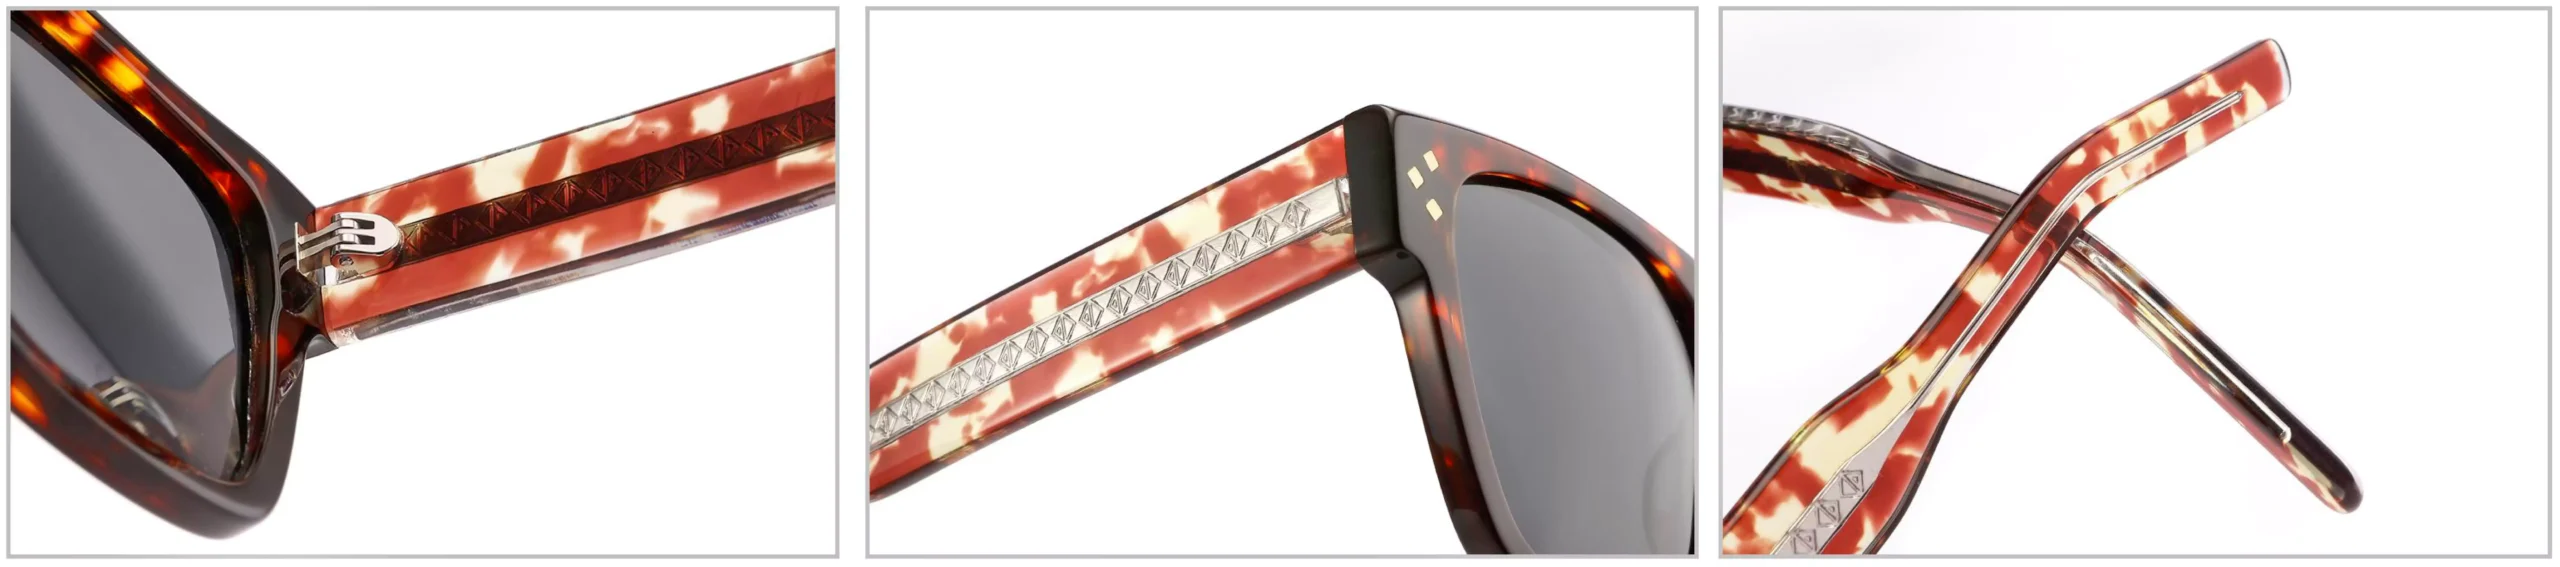 Sunglasses YD1201T Detail Shooting, include temple, temple tip, hinge, endpieces, wire cores, rivets